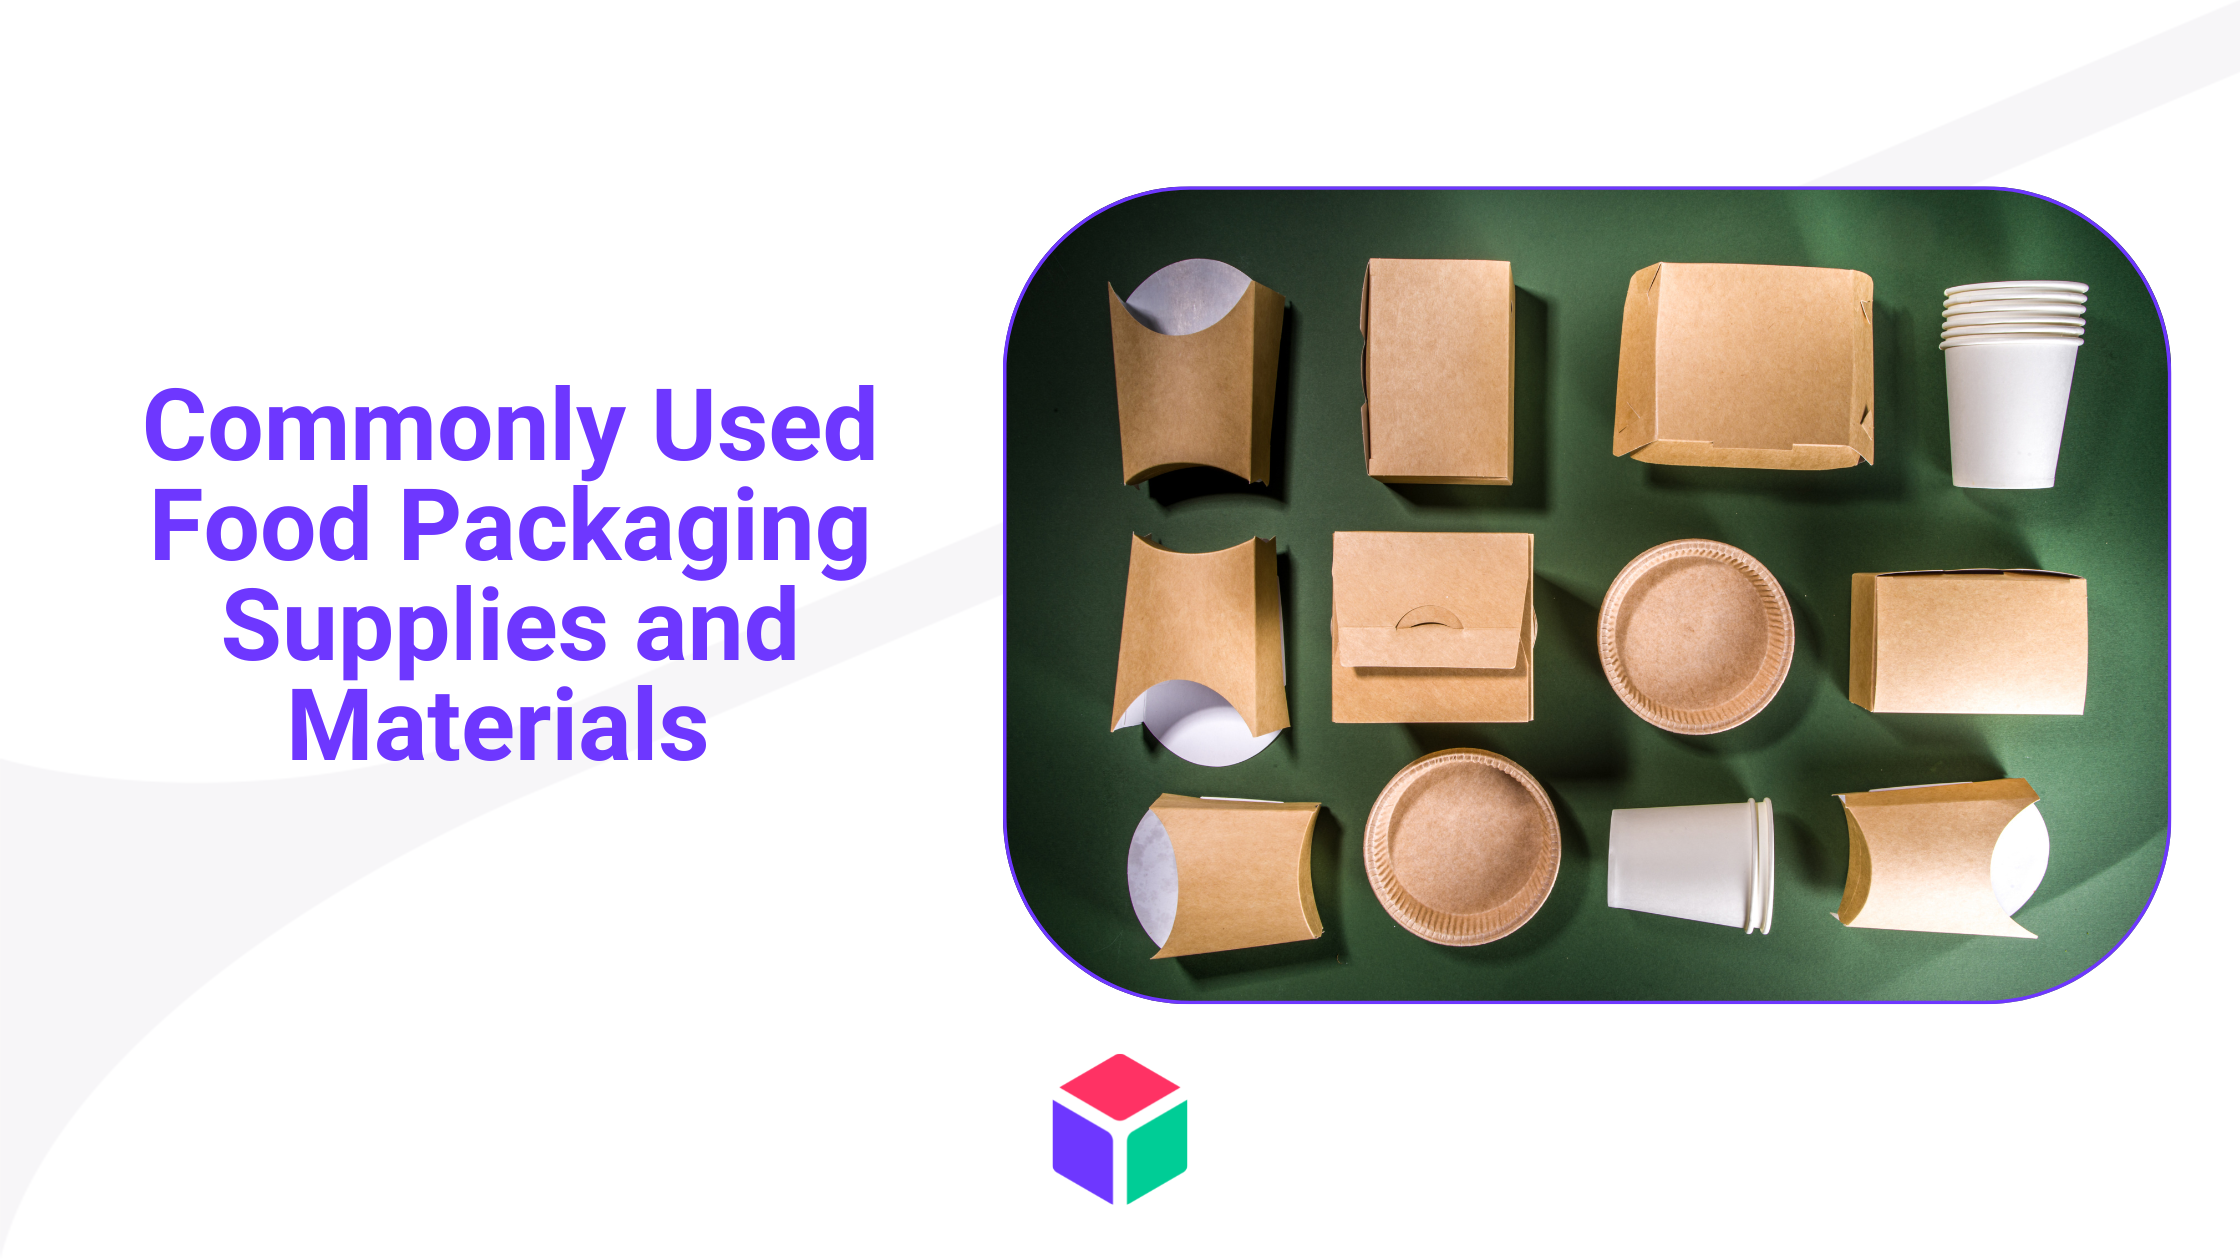 Types of Cardboard Food Packaging Supplies and Materials